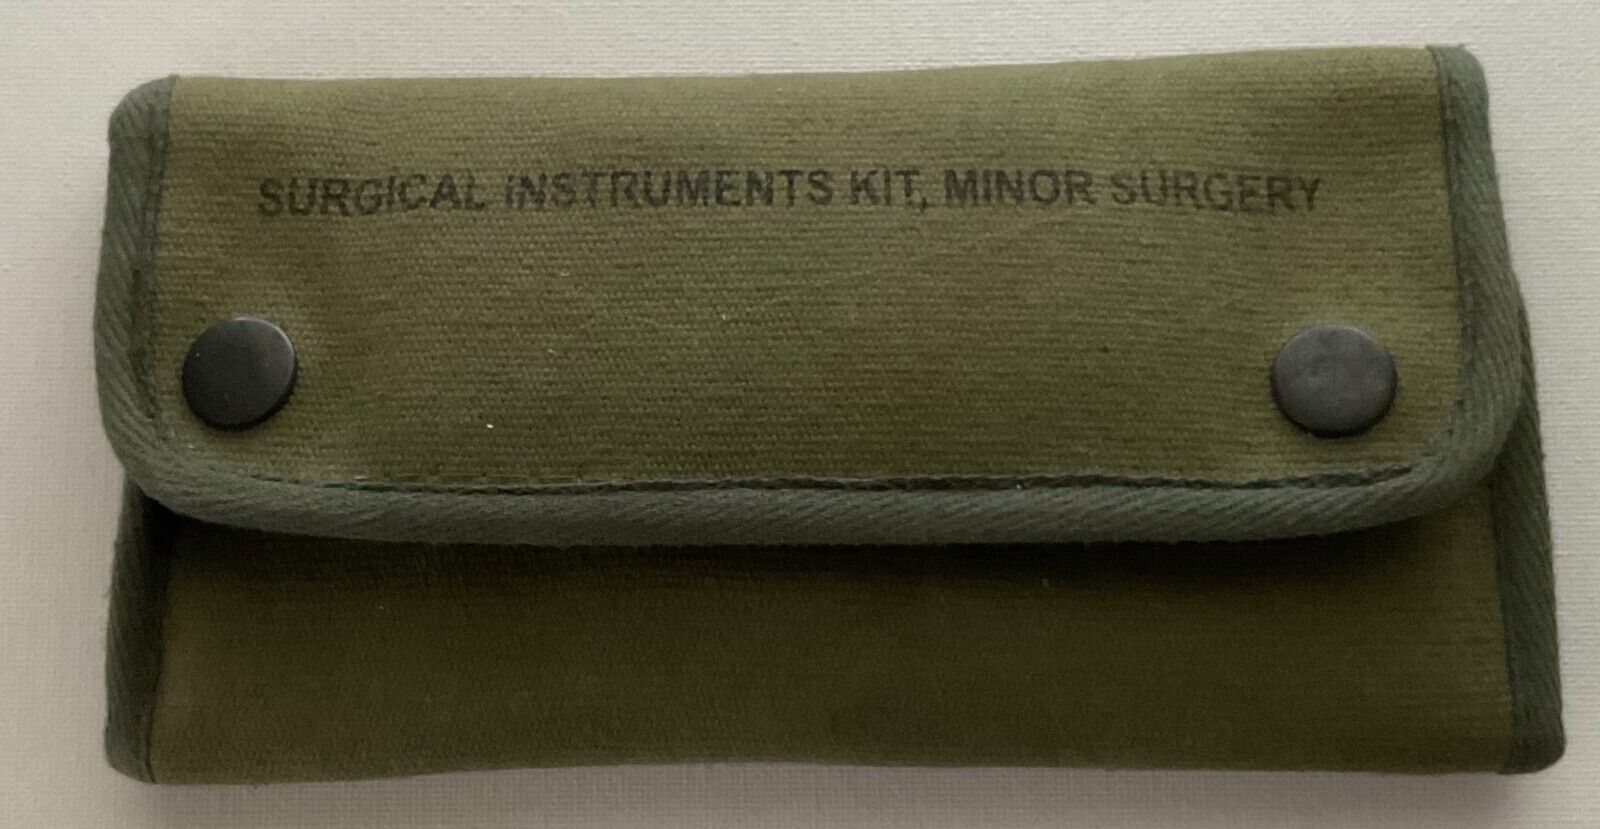 Vintage US Military Surgical Instrument Kit Minor Field Surgery Incomplete